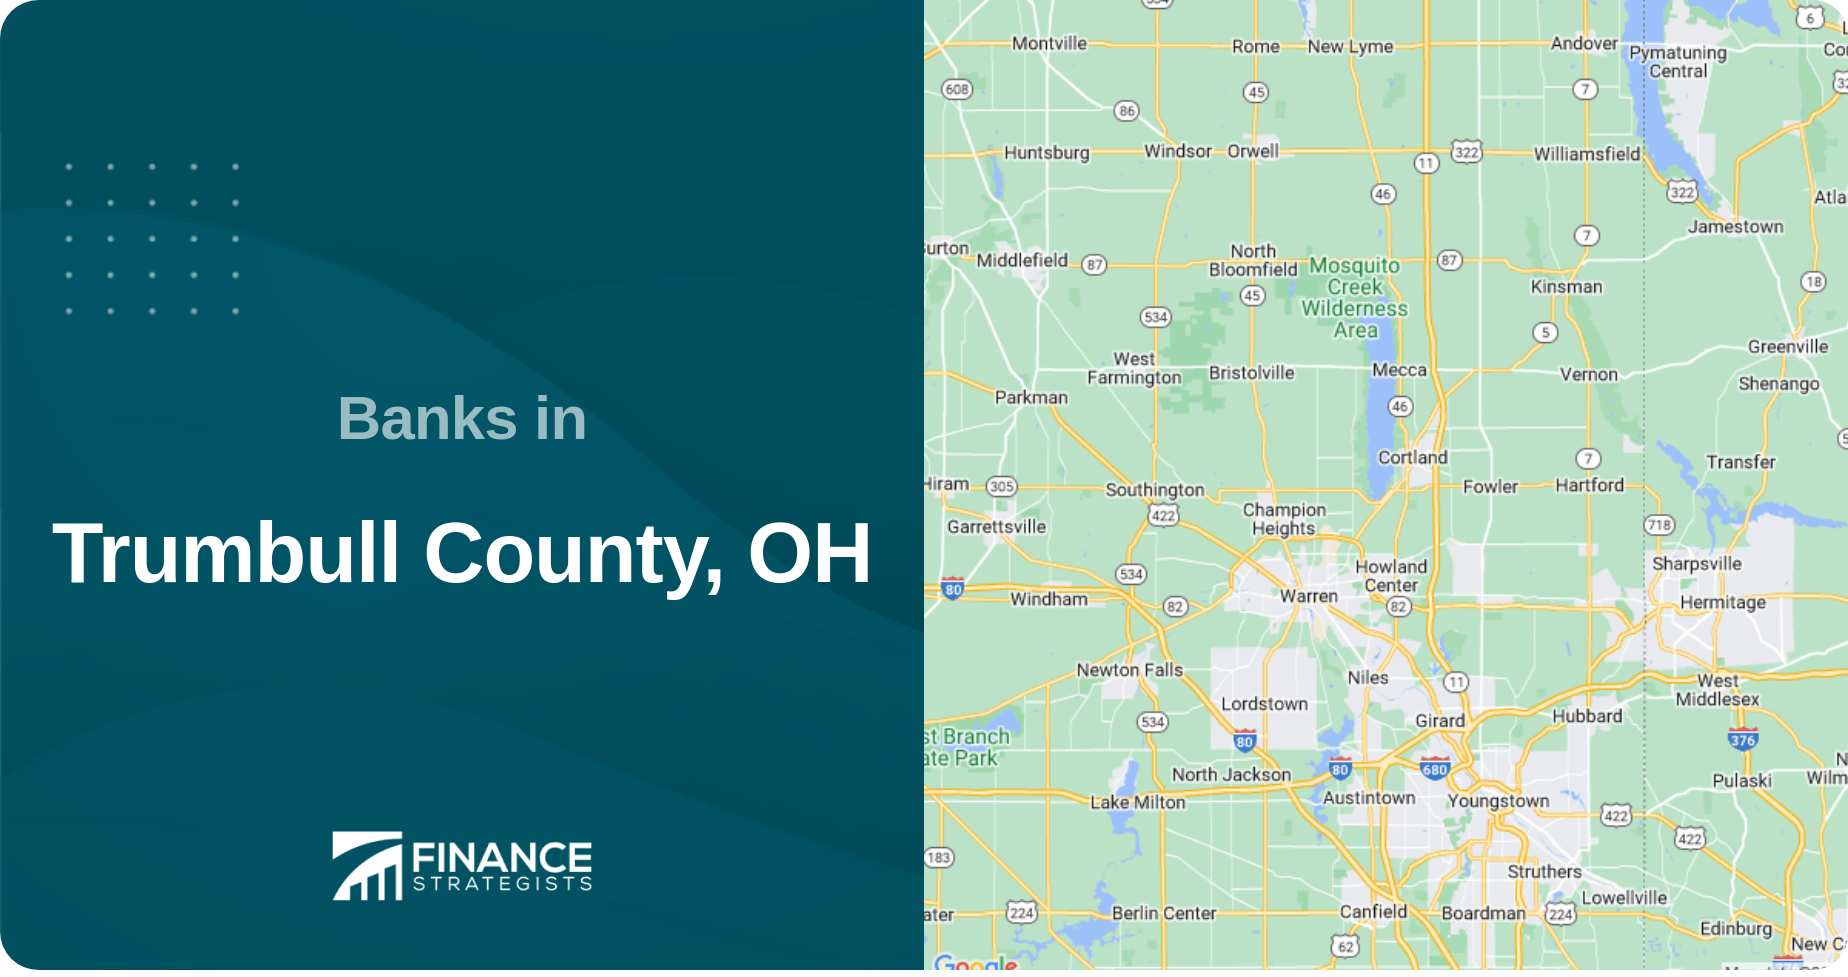 Banks in Trumbull County, OH